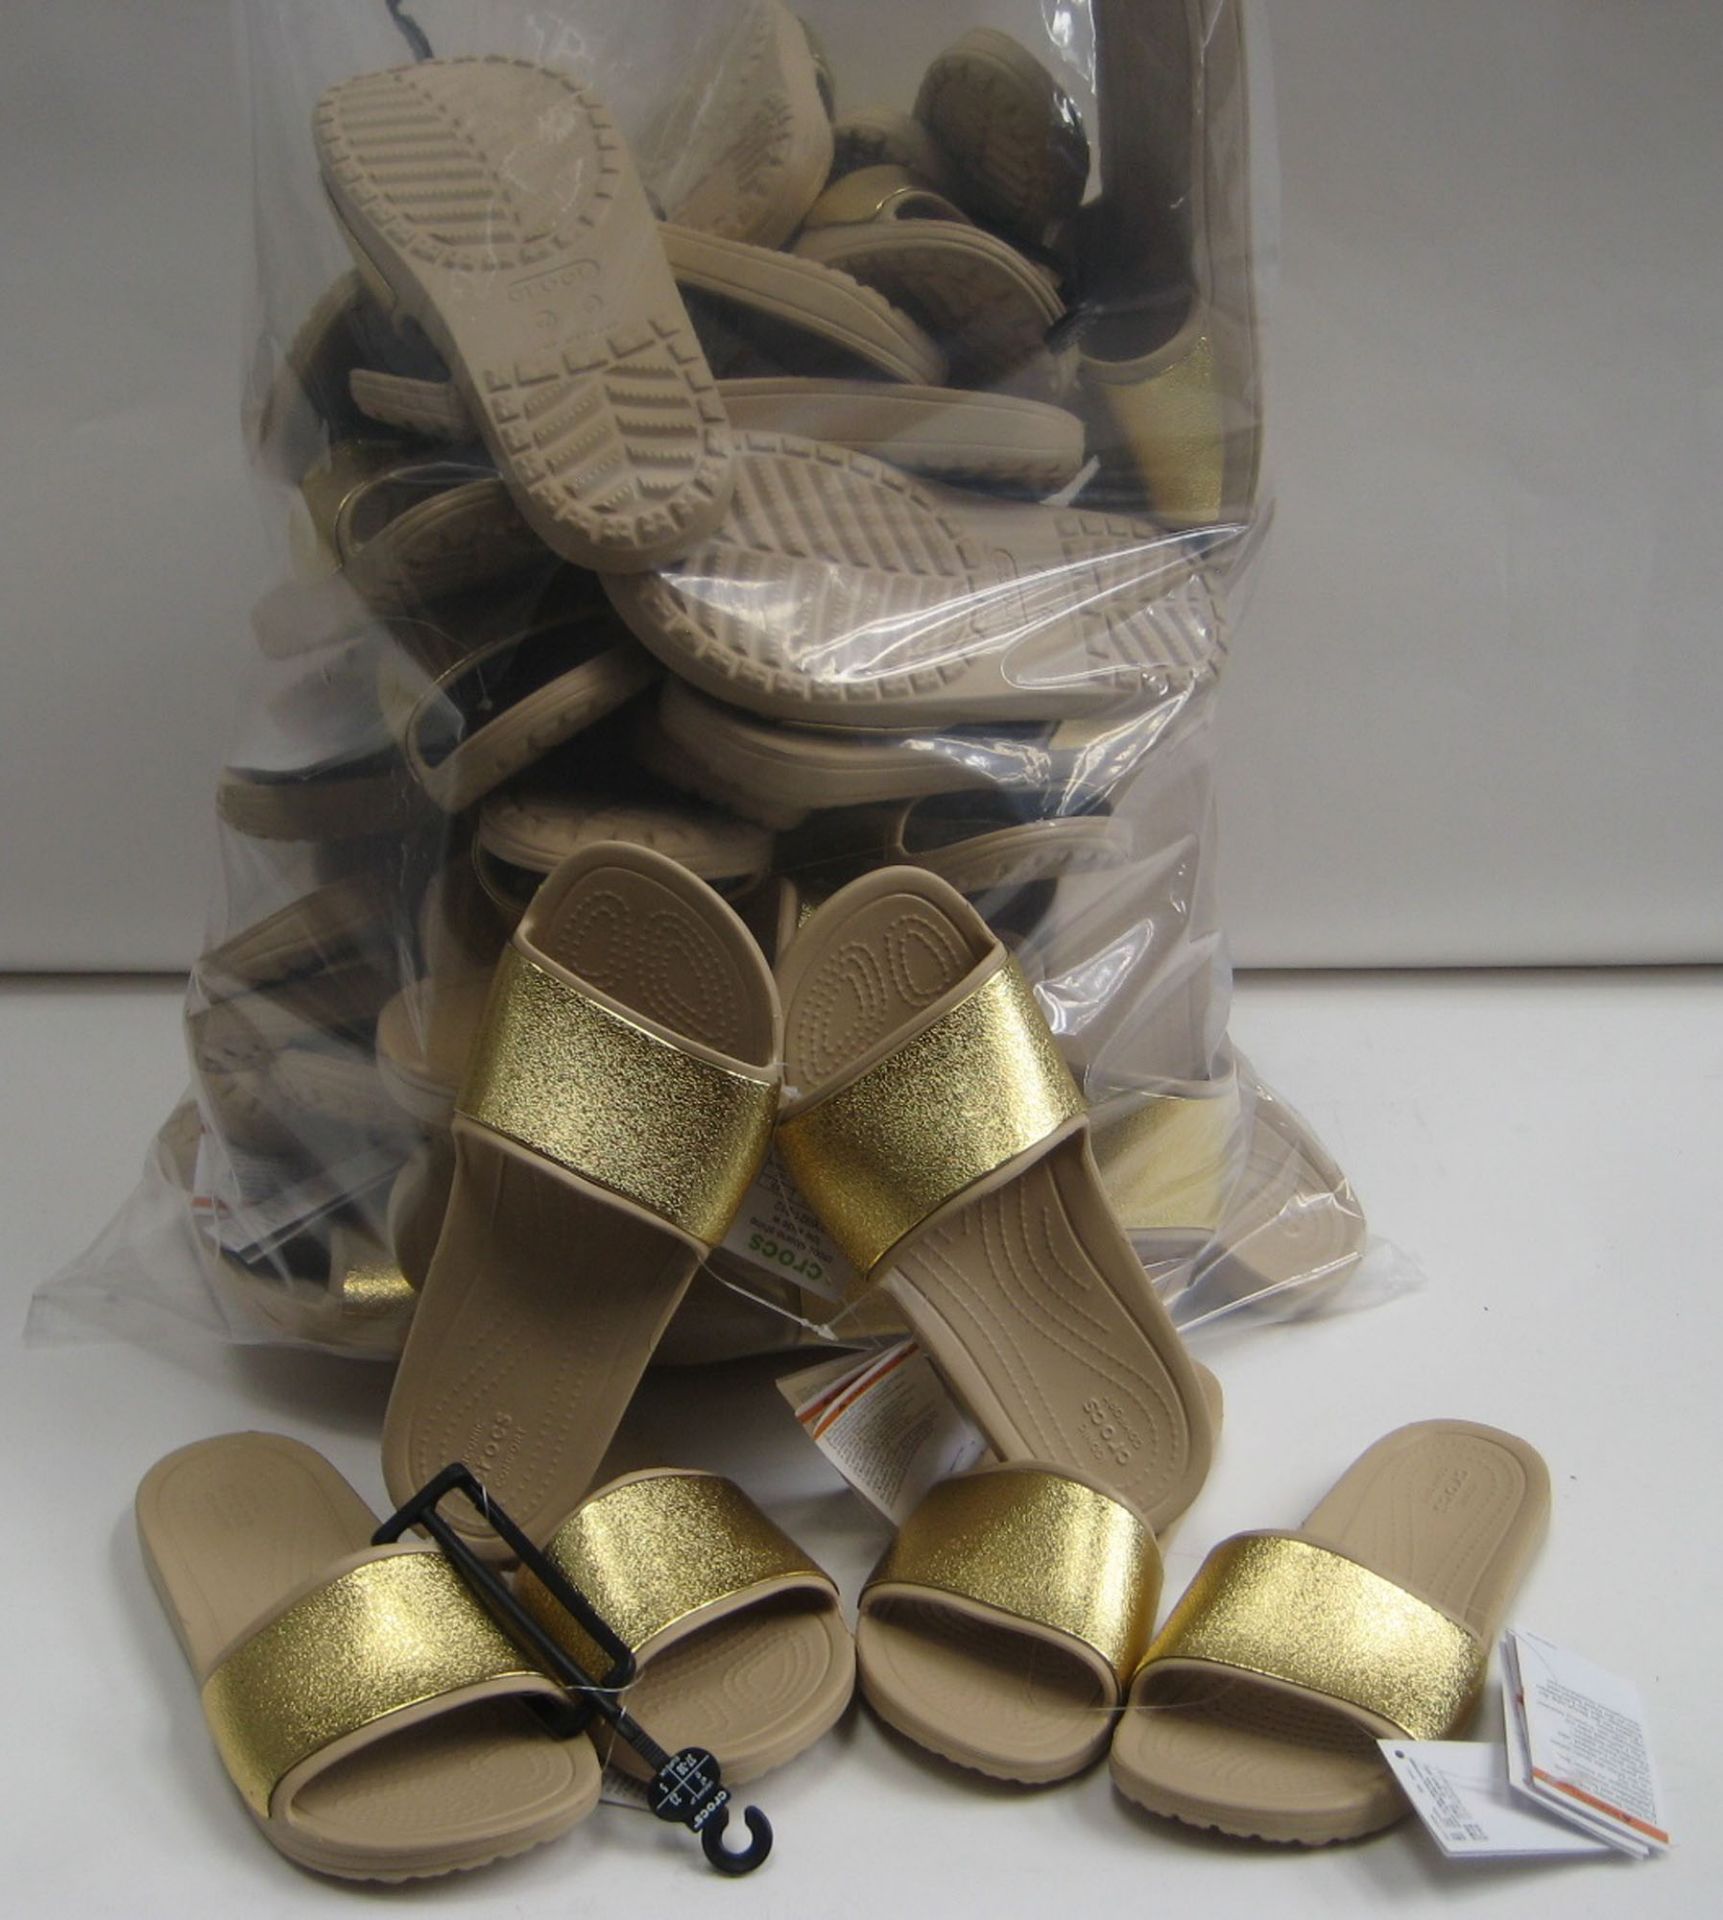 Bag containing approx 24 pairs of Crocs ladies sliders in beige with gold band